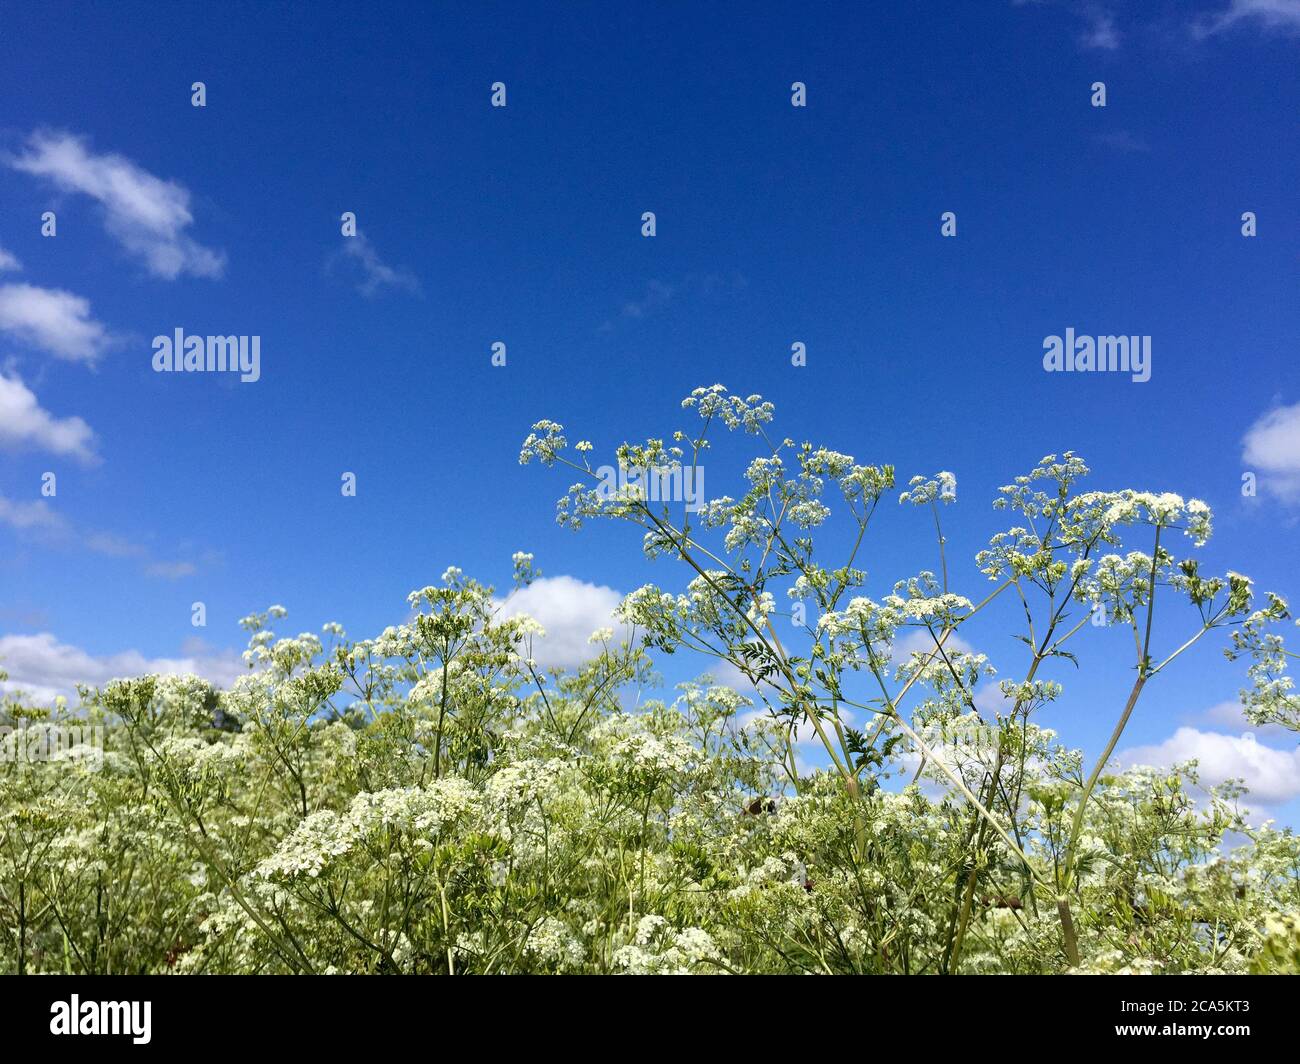 White cow parsley flowers, also known as keck or wild chervil, against blue sky. Background. Scientific name Anthriscus sylvestris. Stock Photo